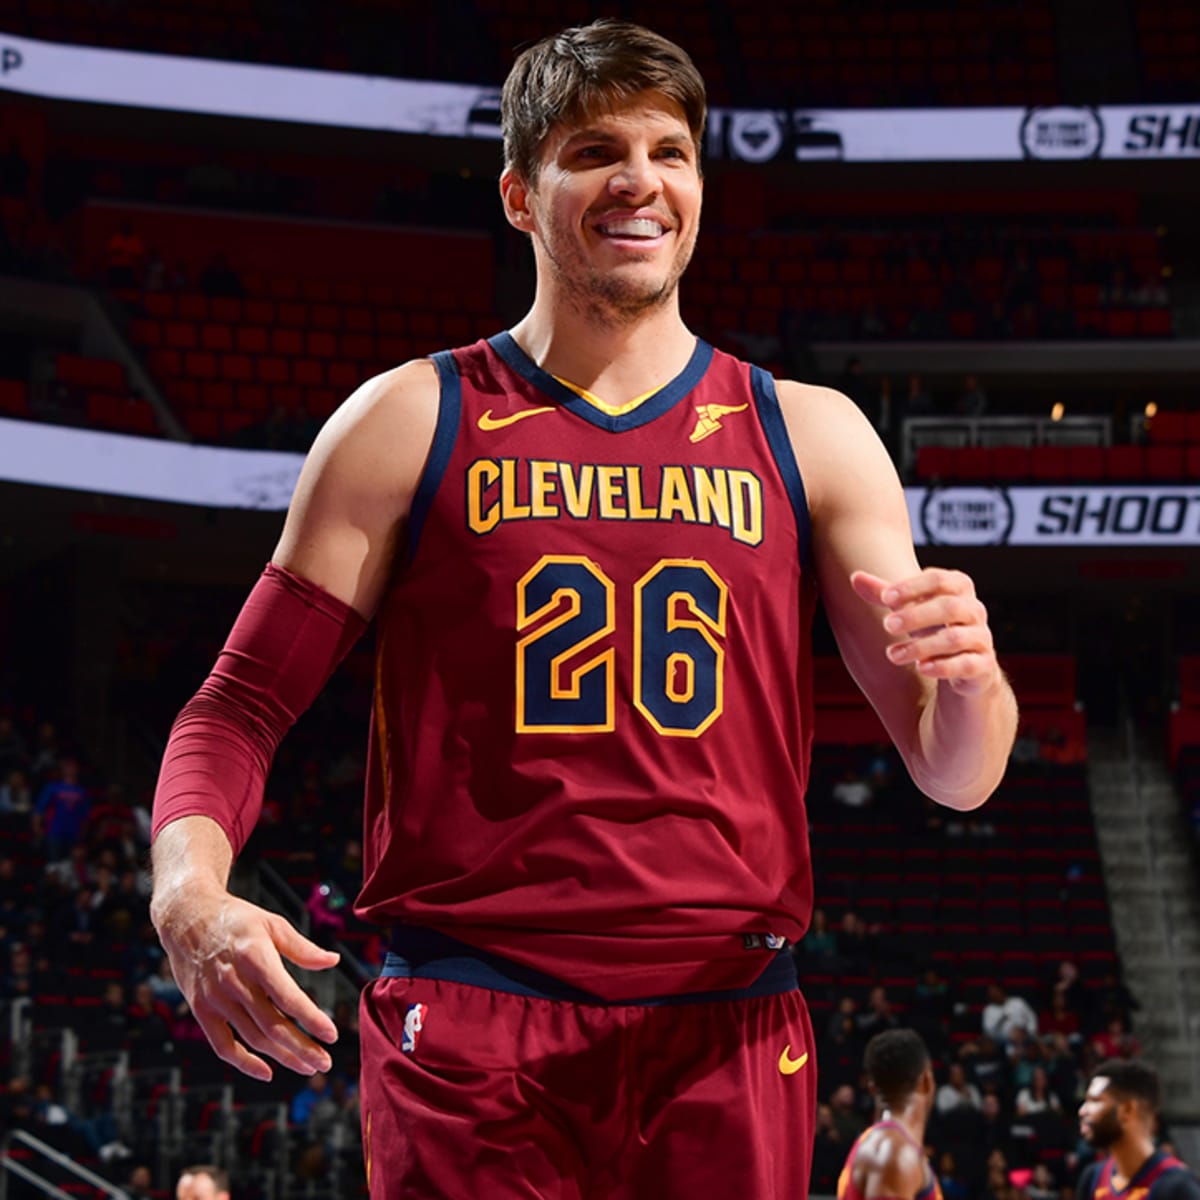 Report: Bucks sign sharpshooter Kyle Korver to one-year contract